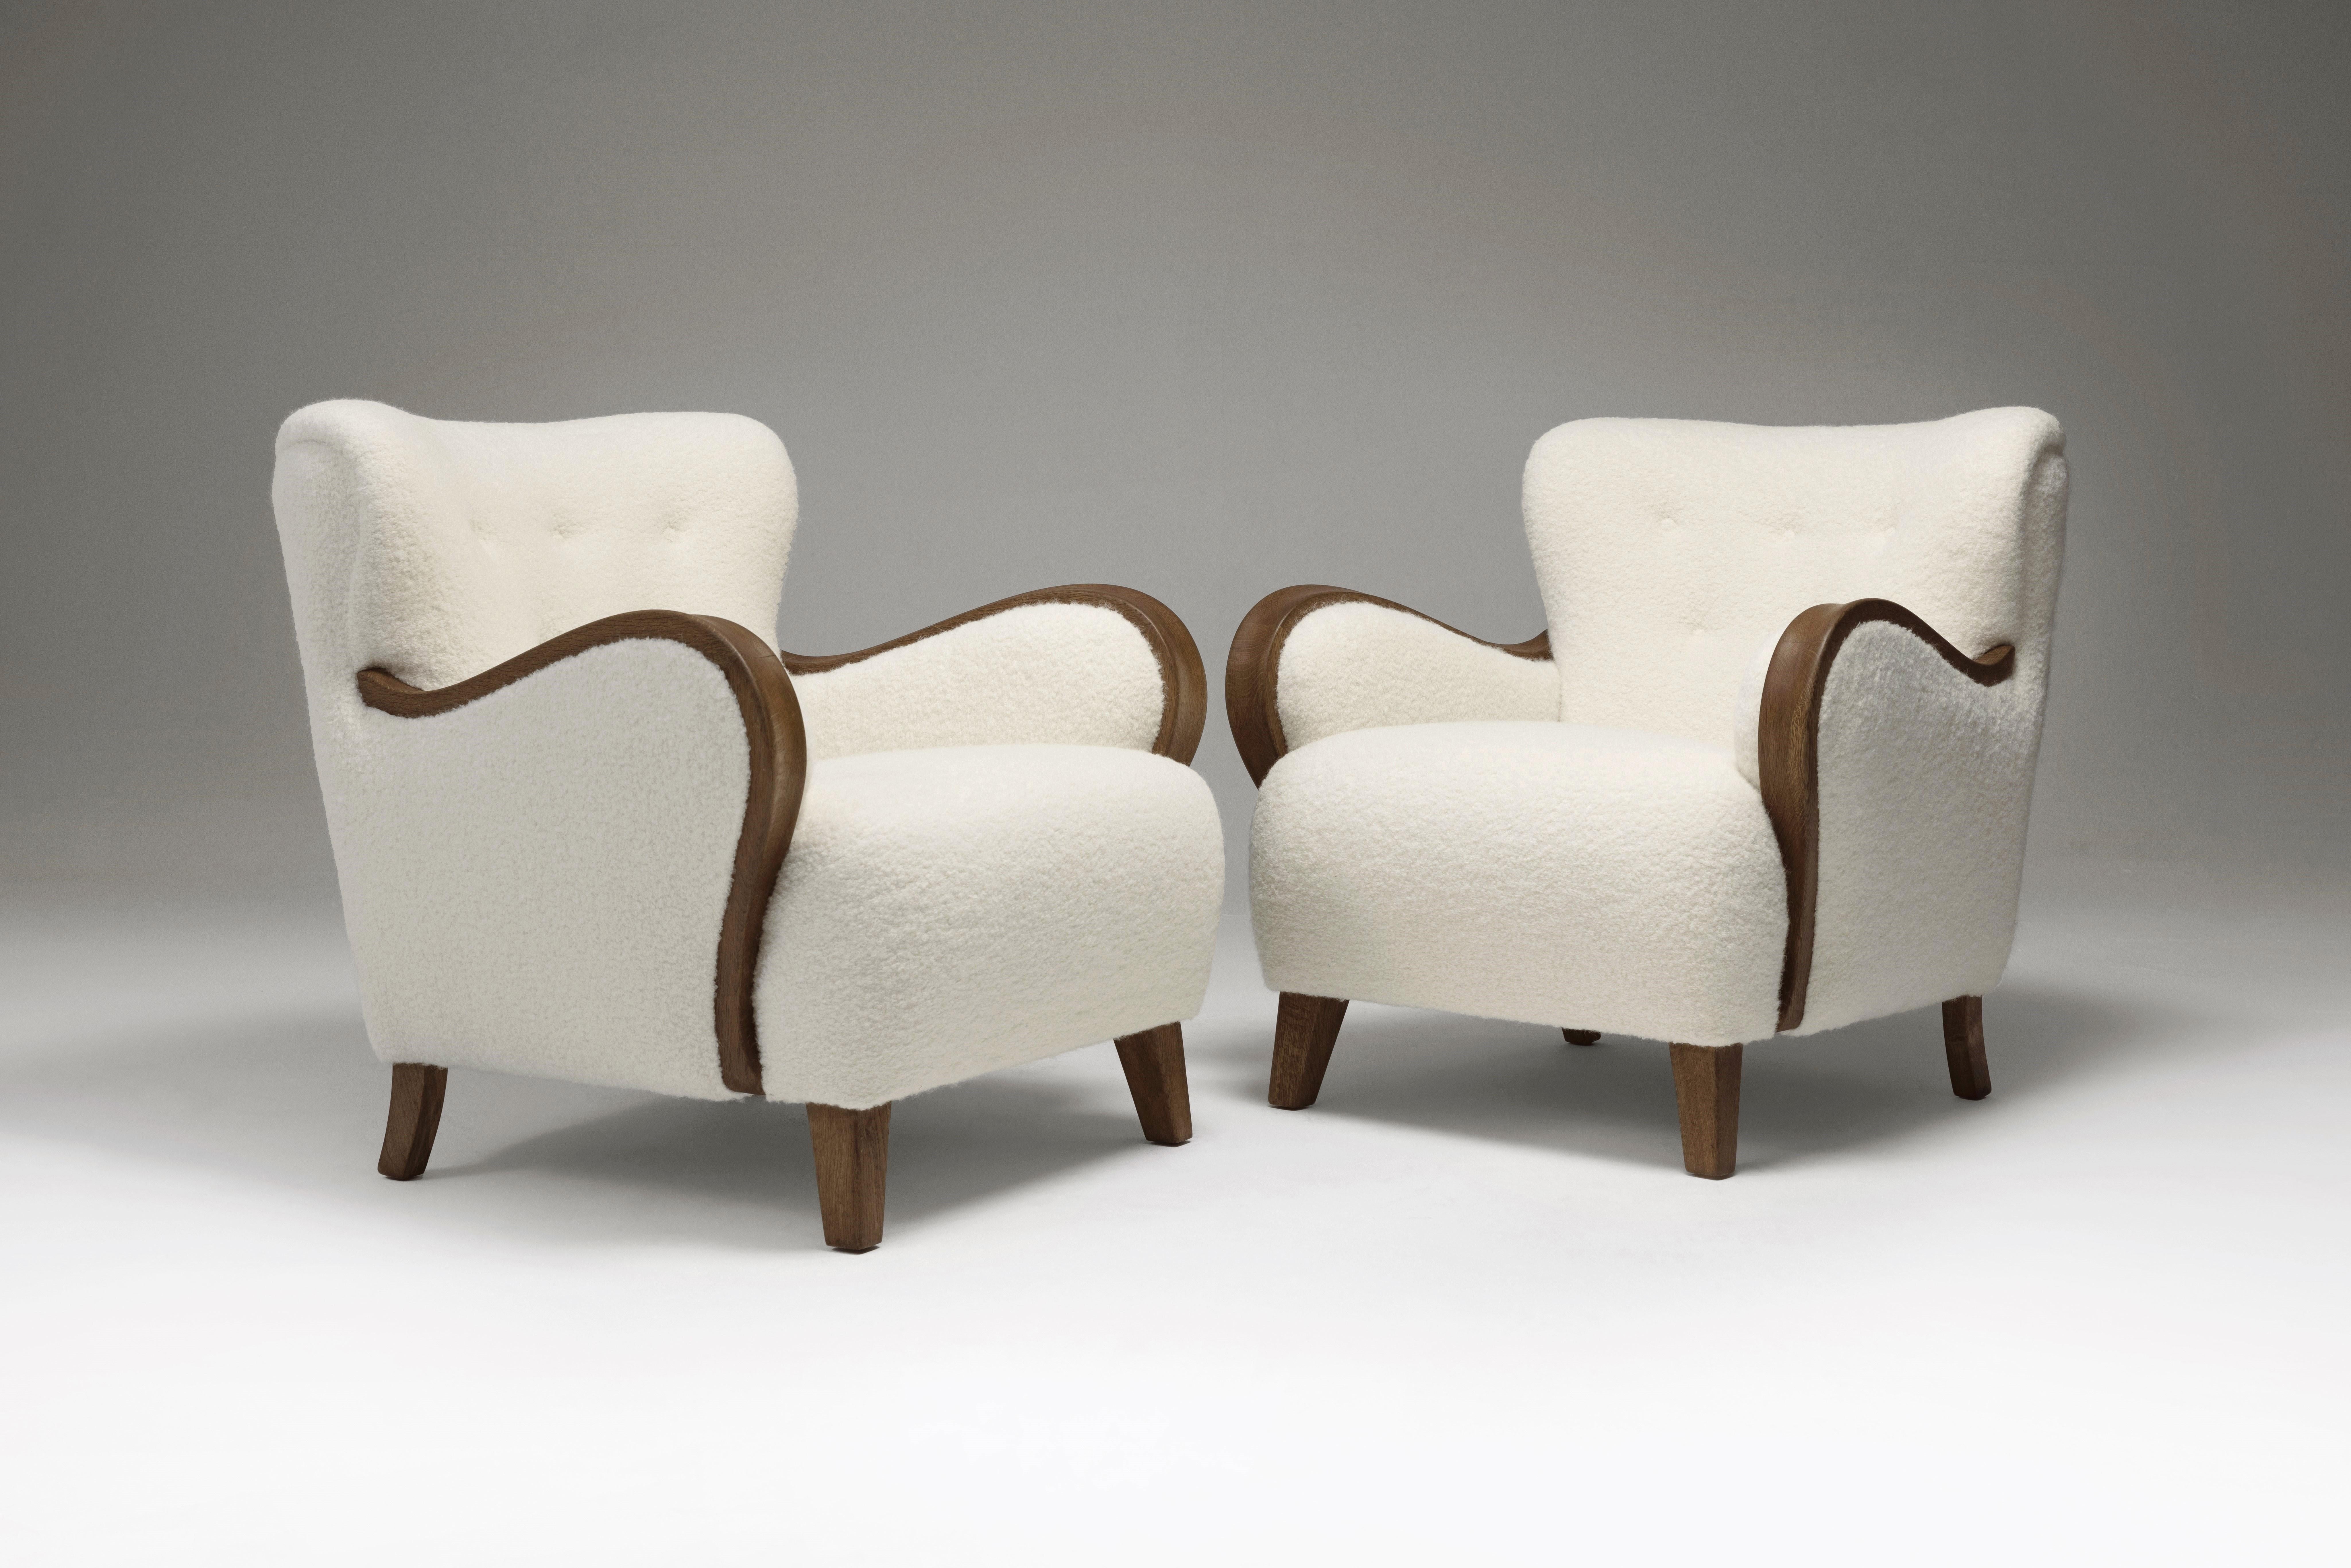 These unique armchairs perfectly reflect the quality and craftsmanship of Danish cabinetmakers and the instantly recognizable features of Scandinavian design. Danish designers’ particular predilection for curved shapes and natural wood is clearly